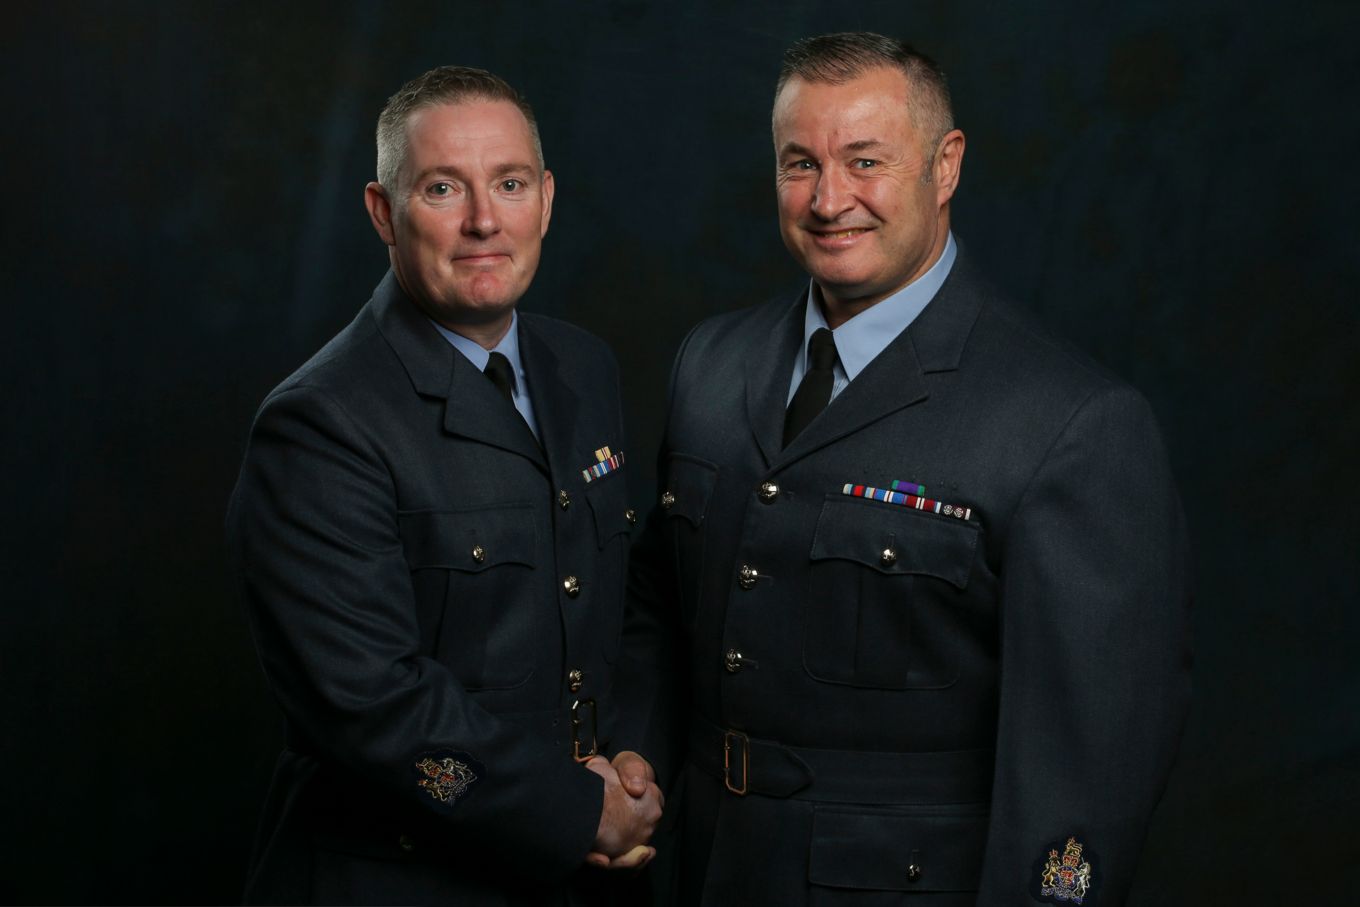 Warrant Officers Si Bervoets and Al Little.